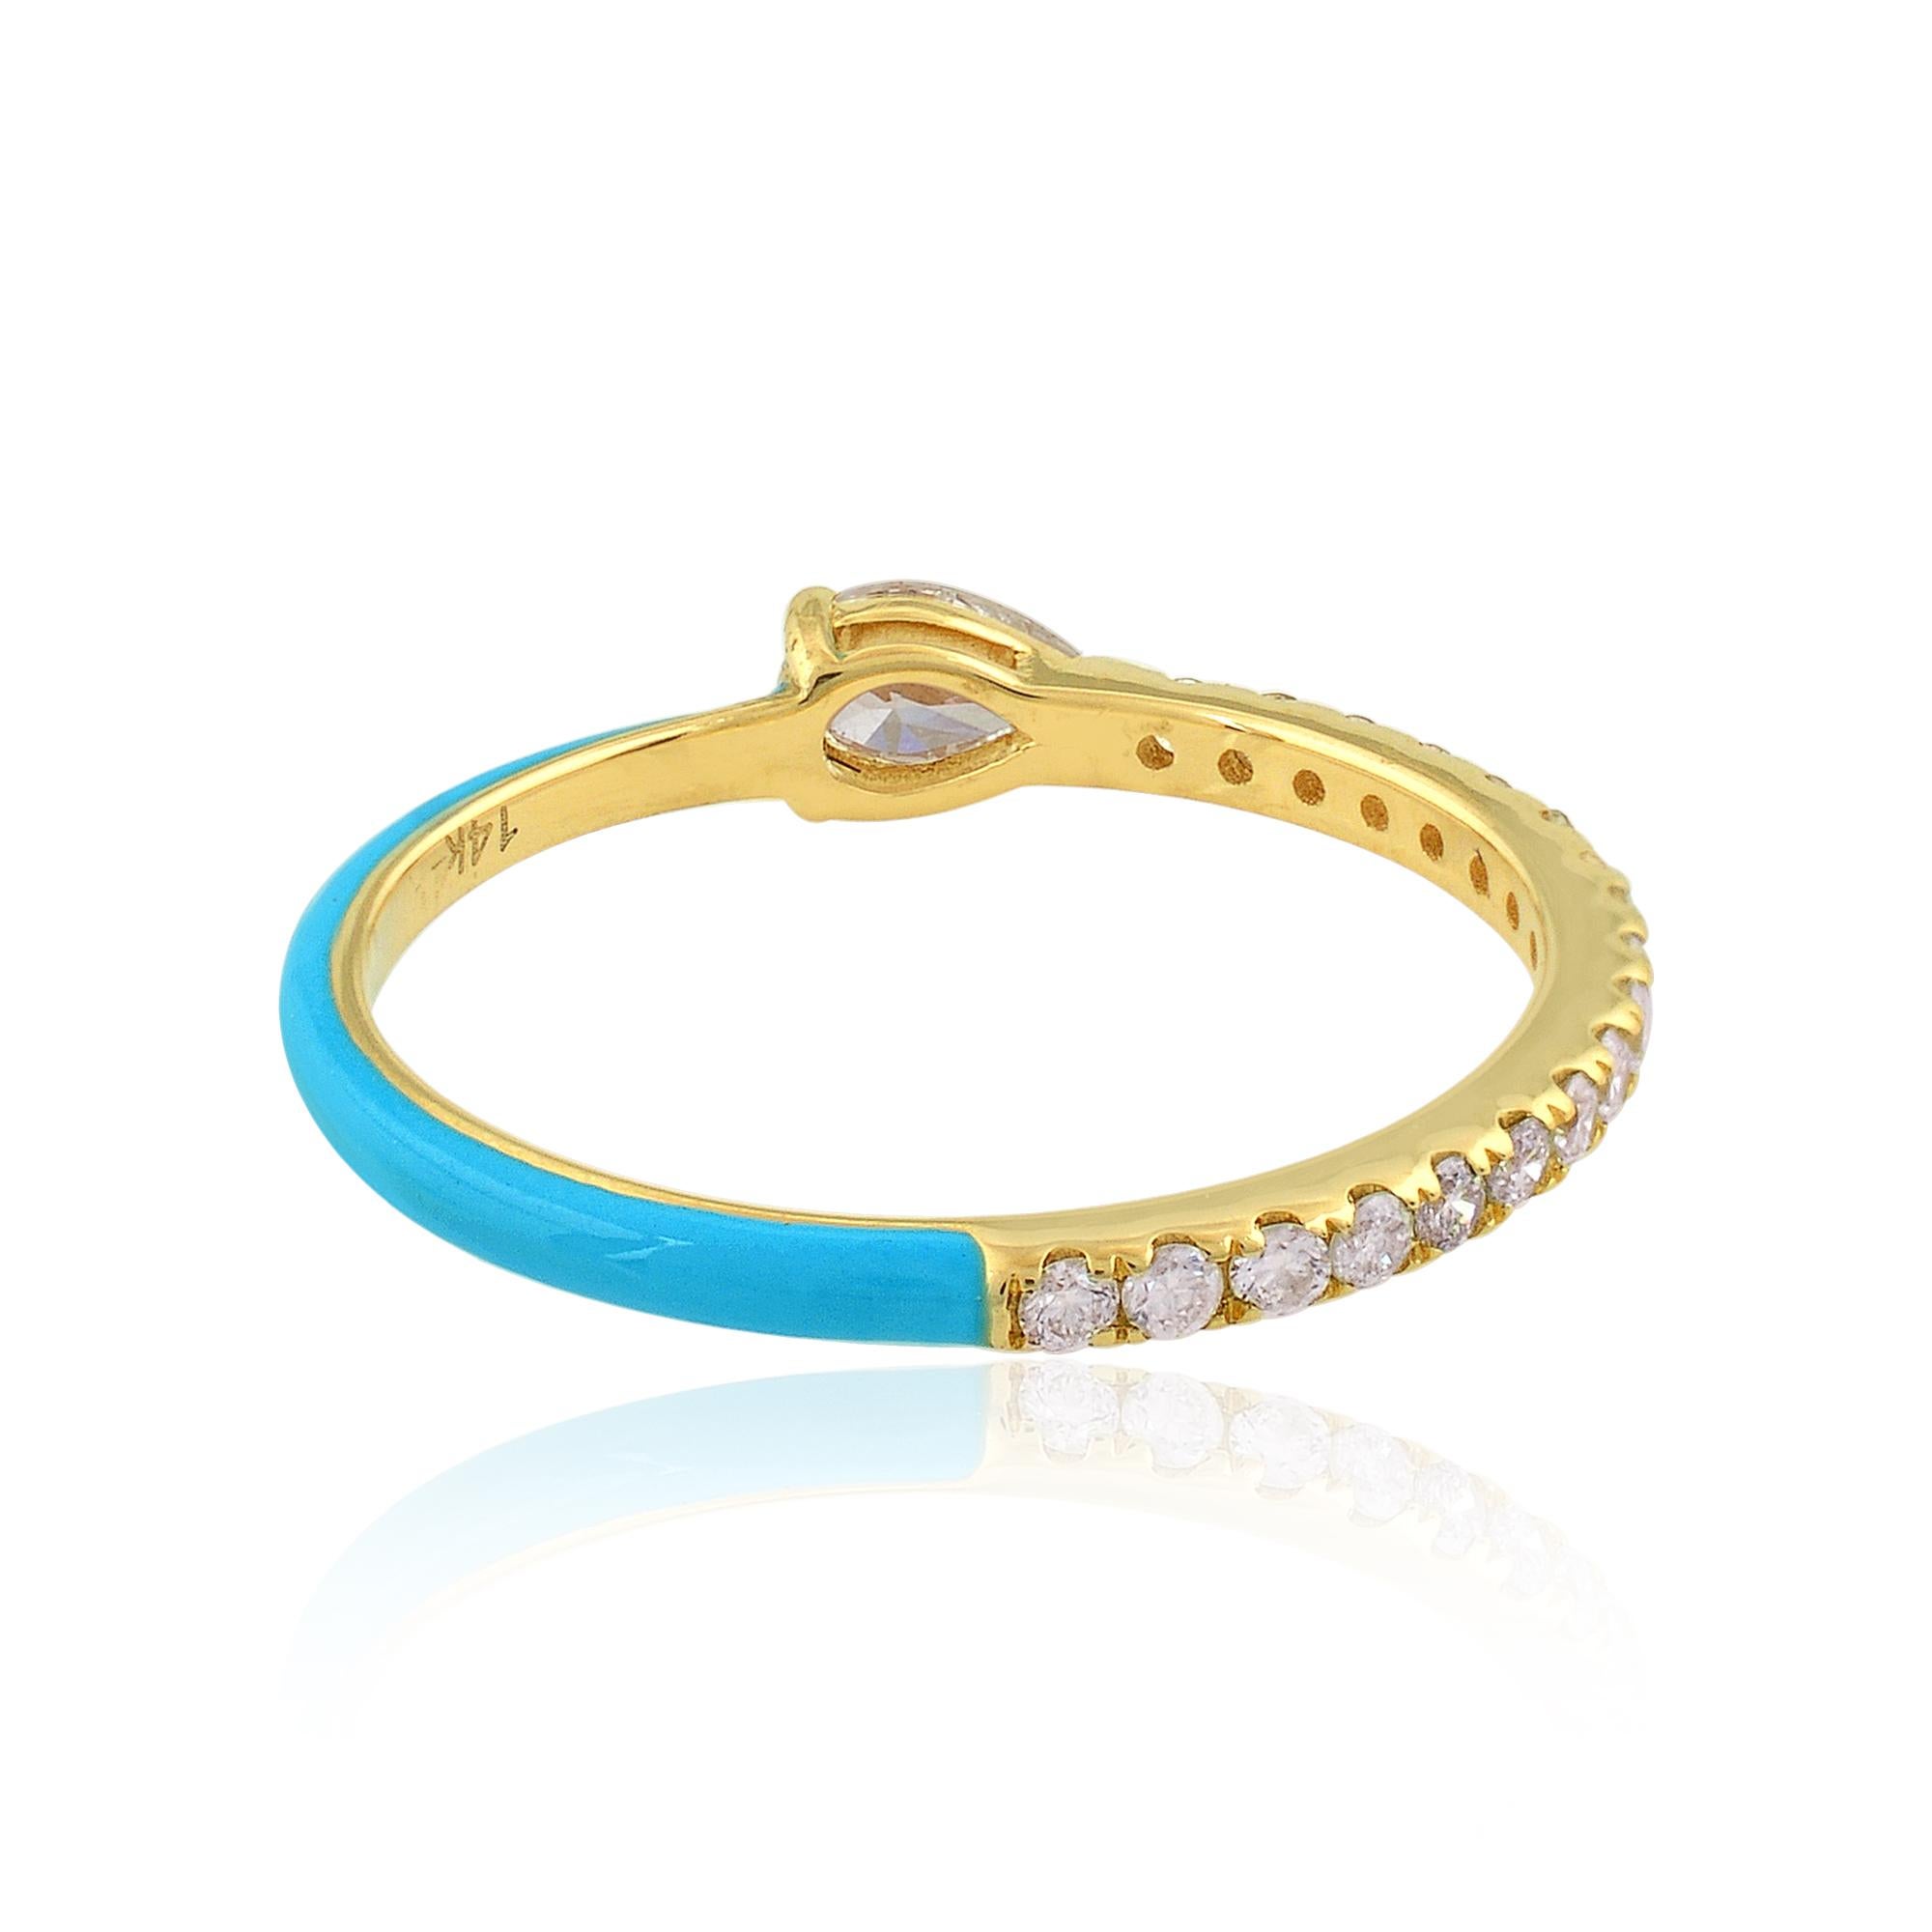 For Sale:  0.47 Carat Pear Diamond Turquoise Color Enamel Ring 14 Karat Yellow Gold Jewelry 3